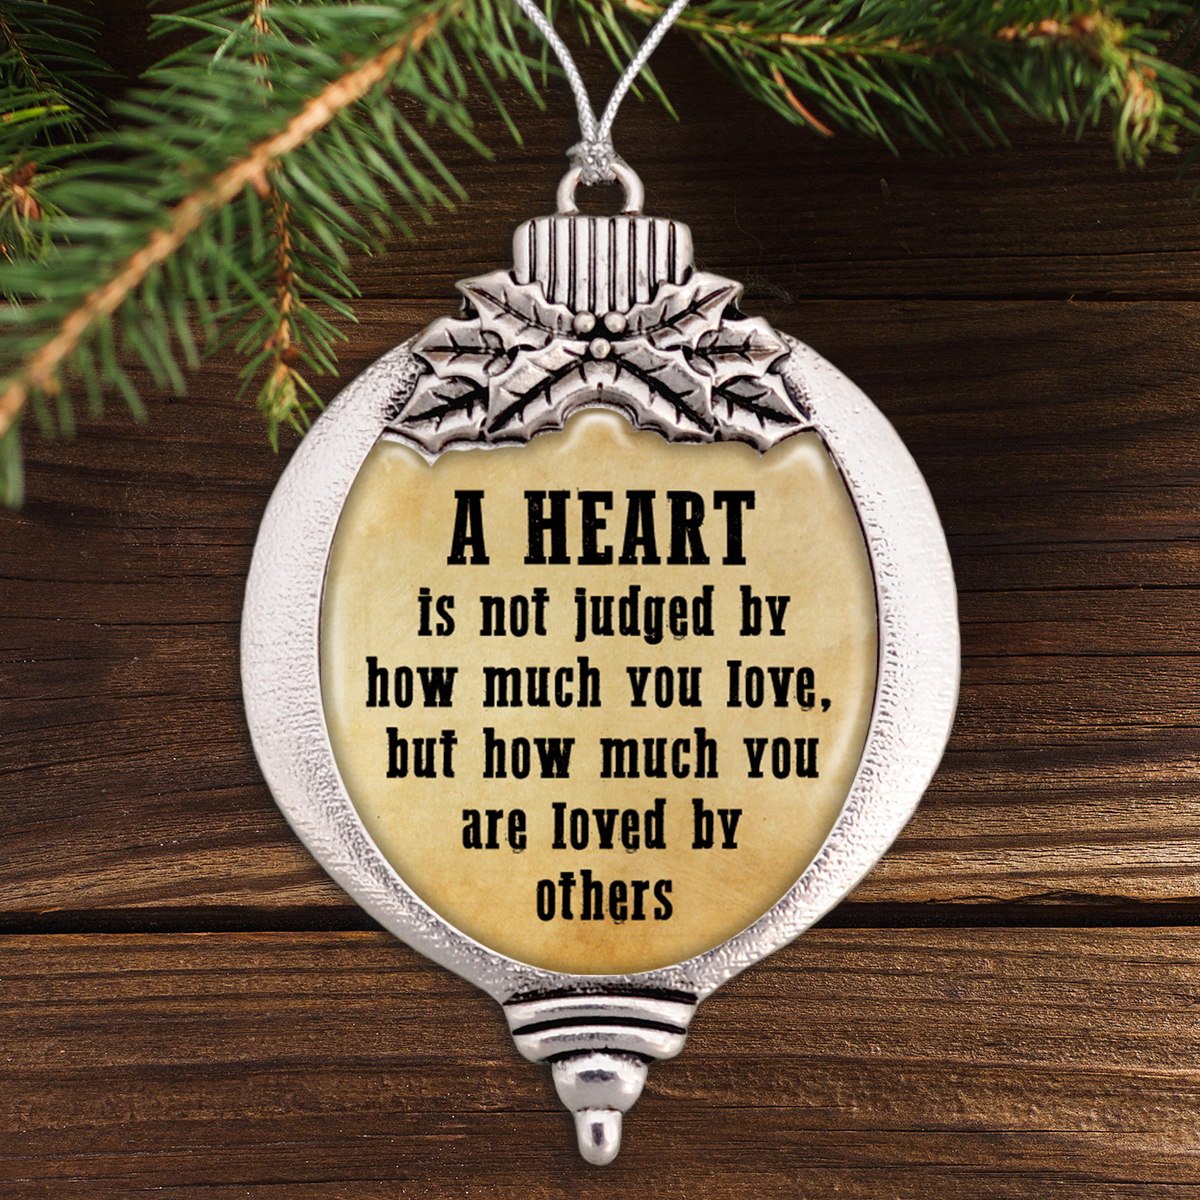 A Heart Is Not Judged Bulb Ornament